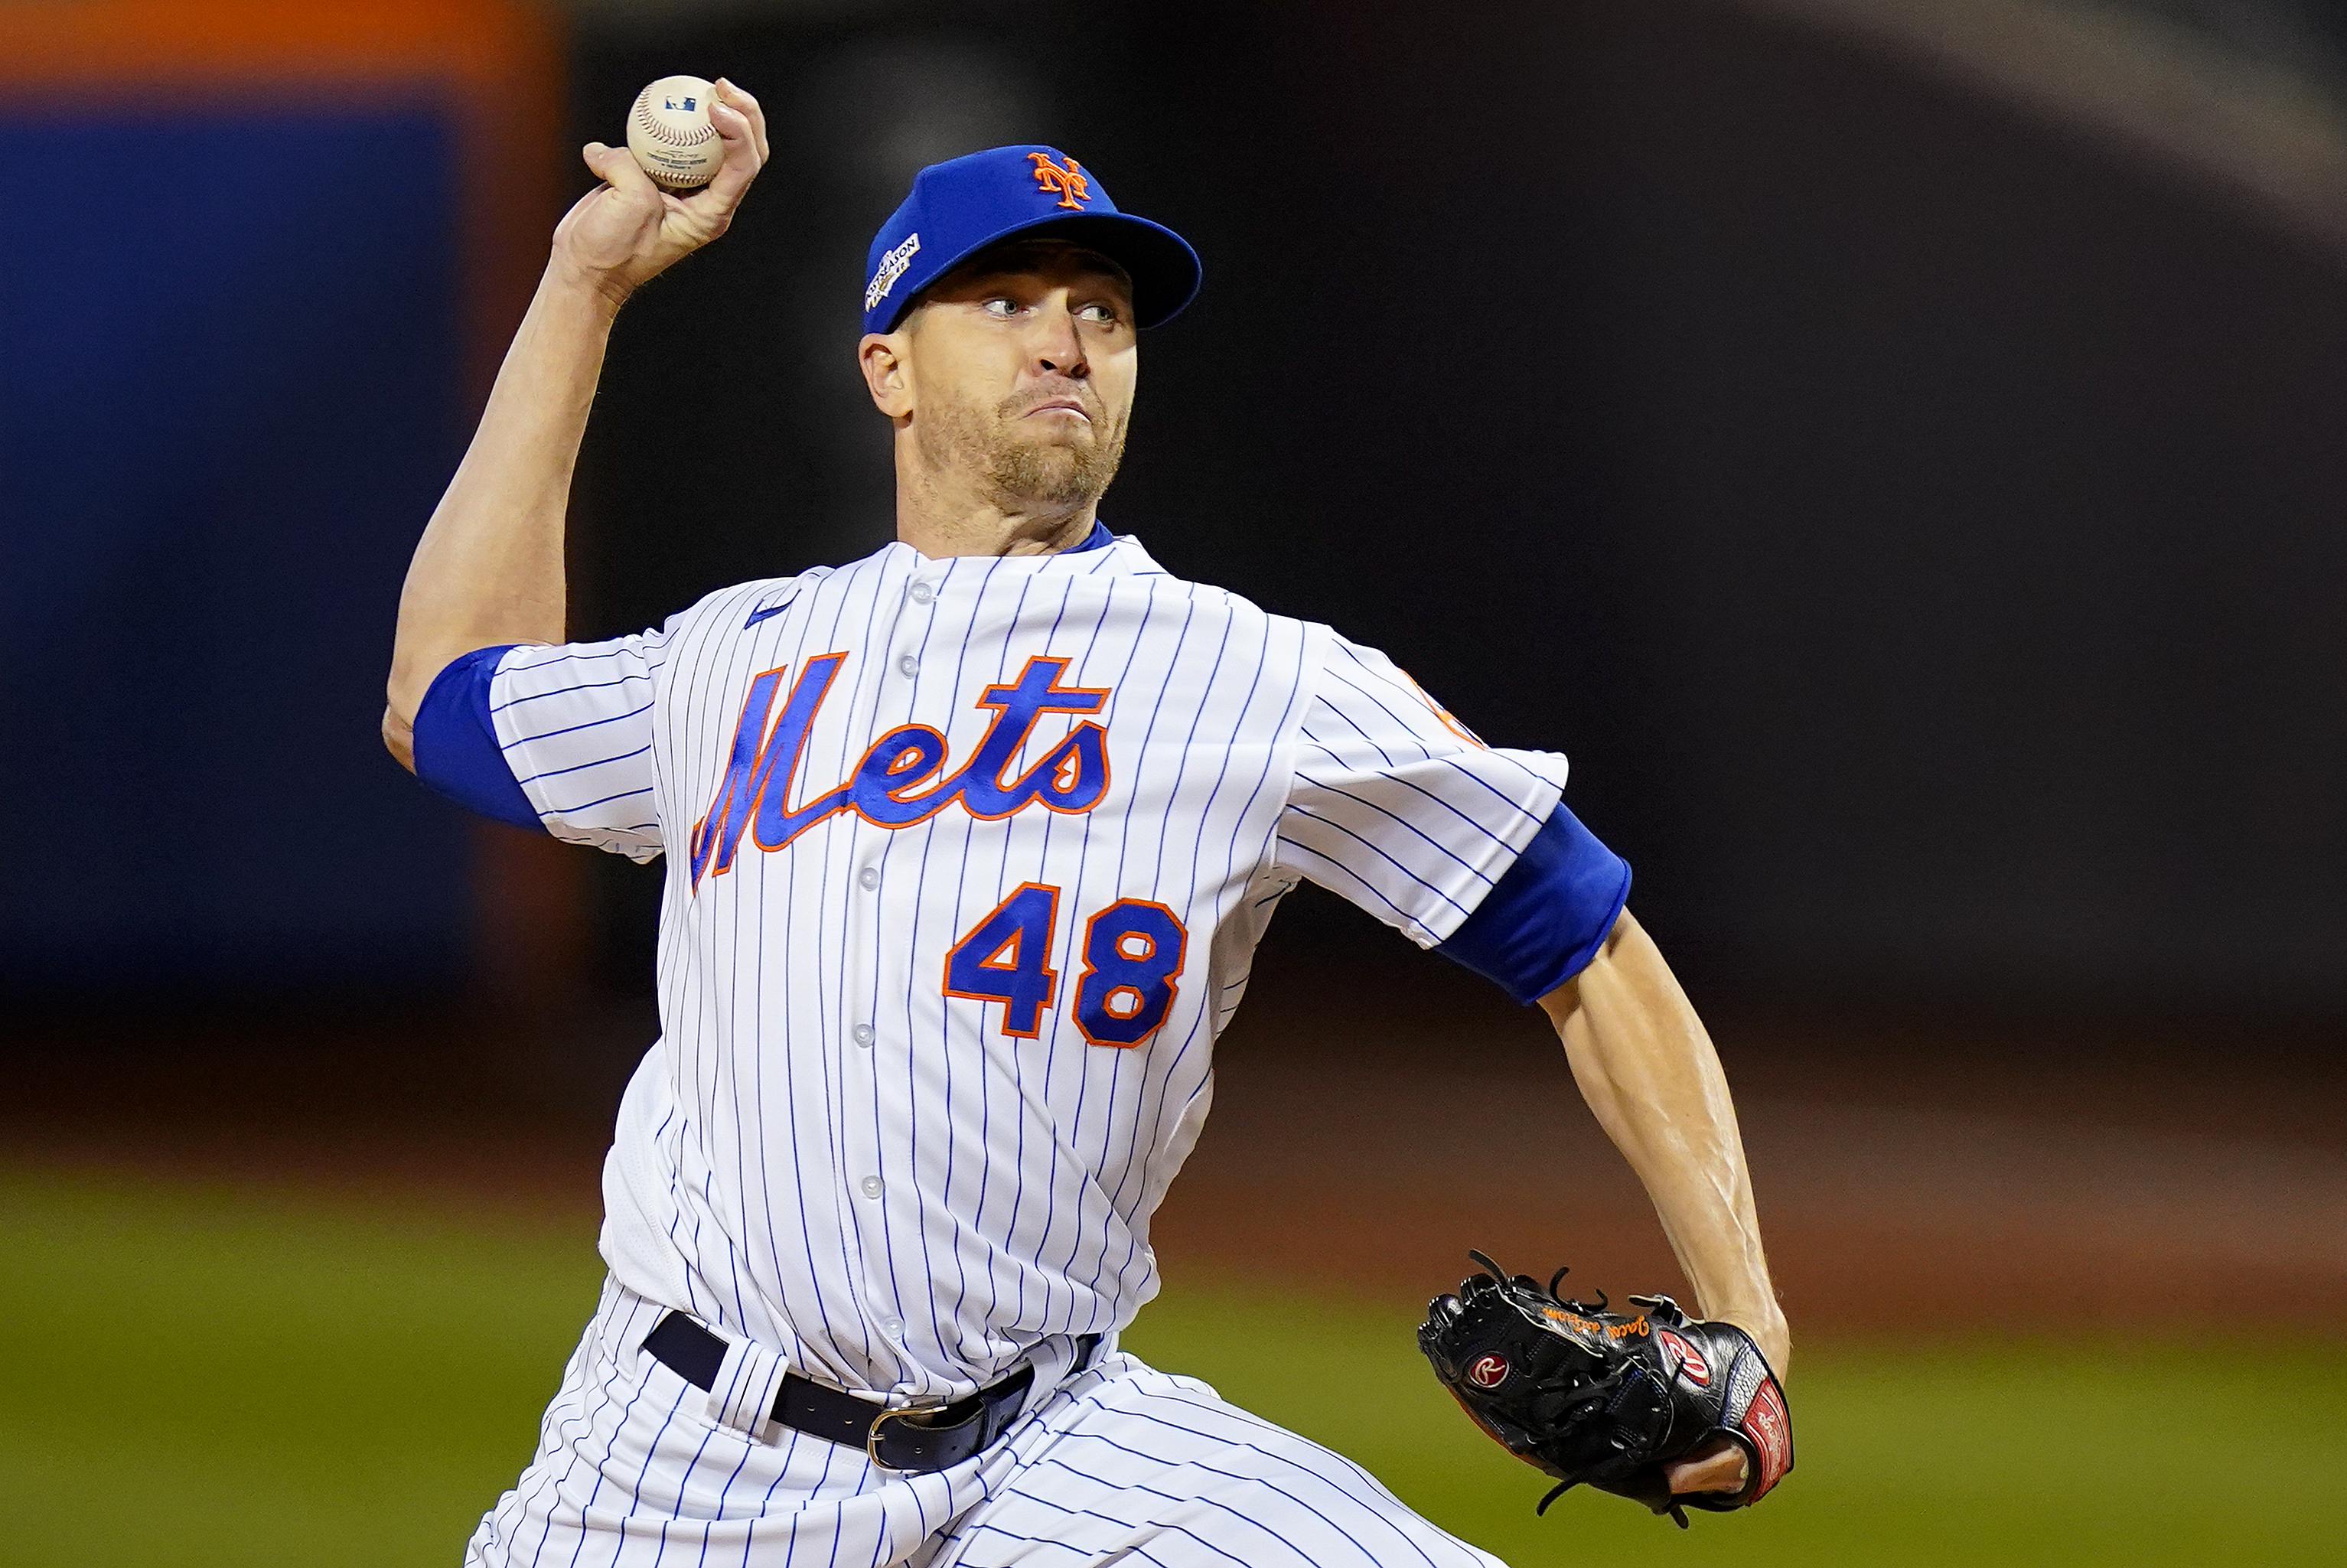 When to expect Mets aces Jacob deGrom and Max Scherzer to return